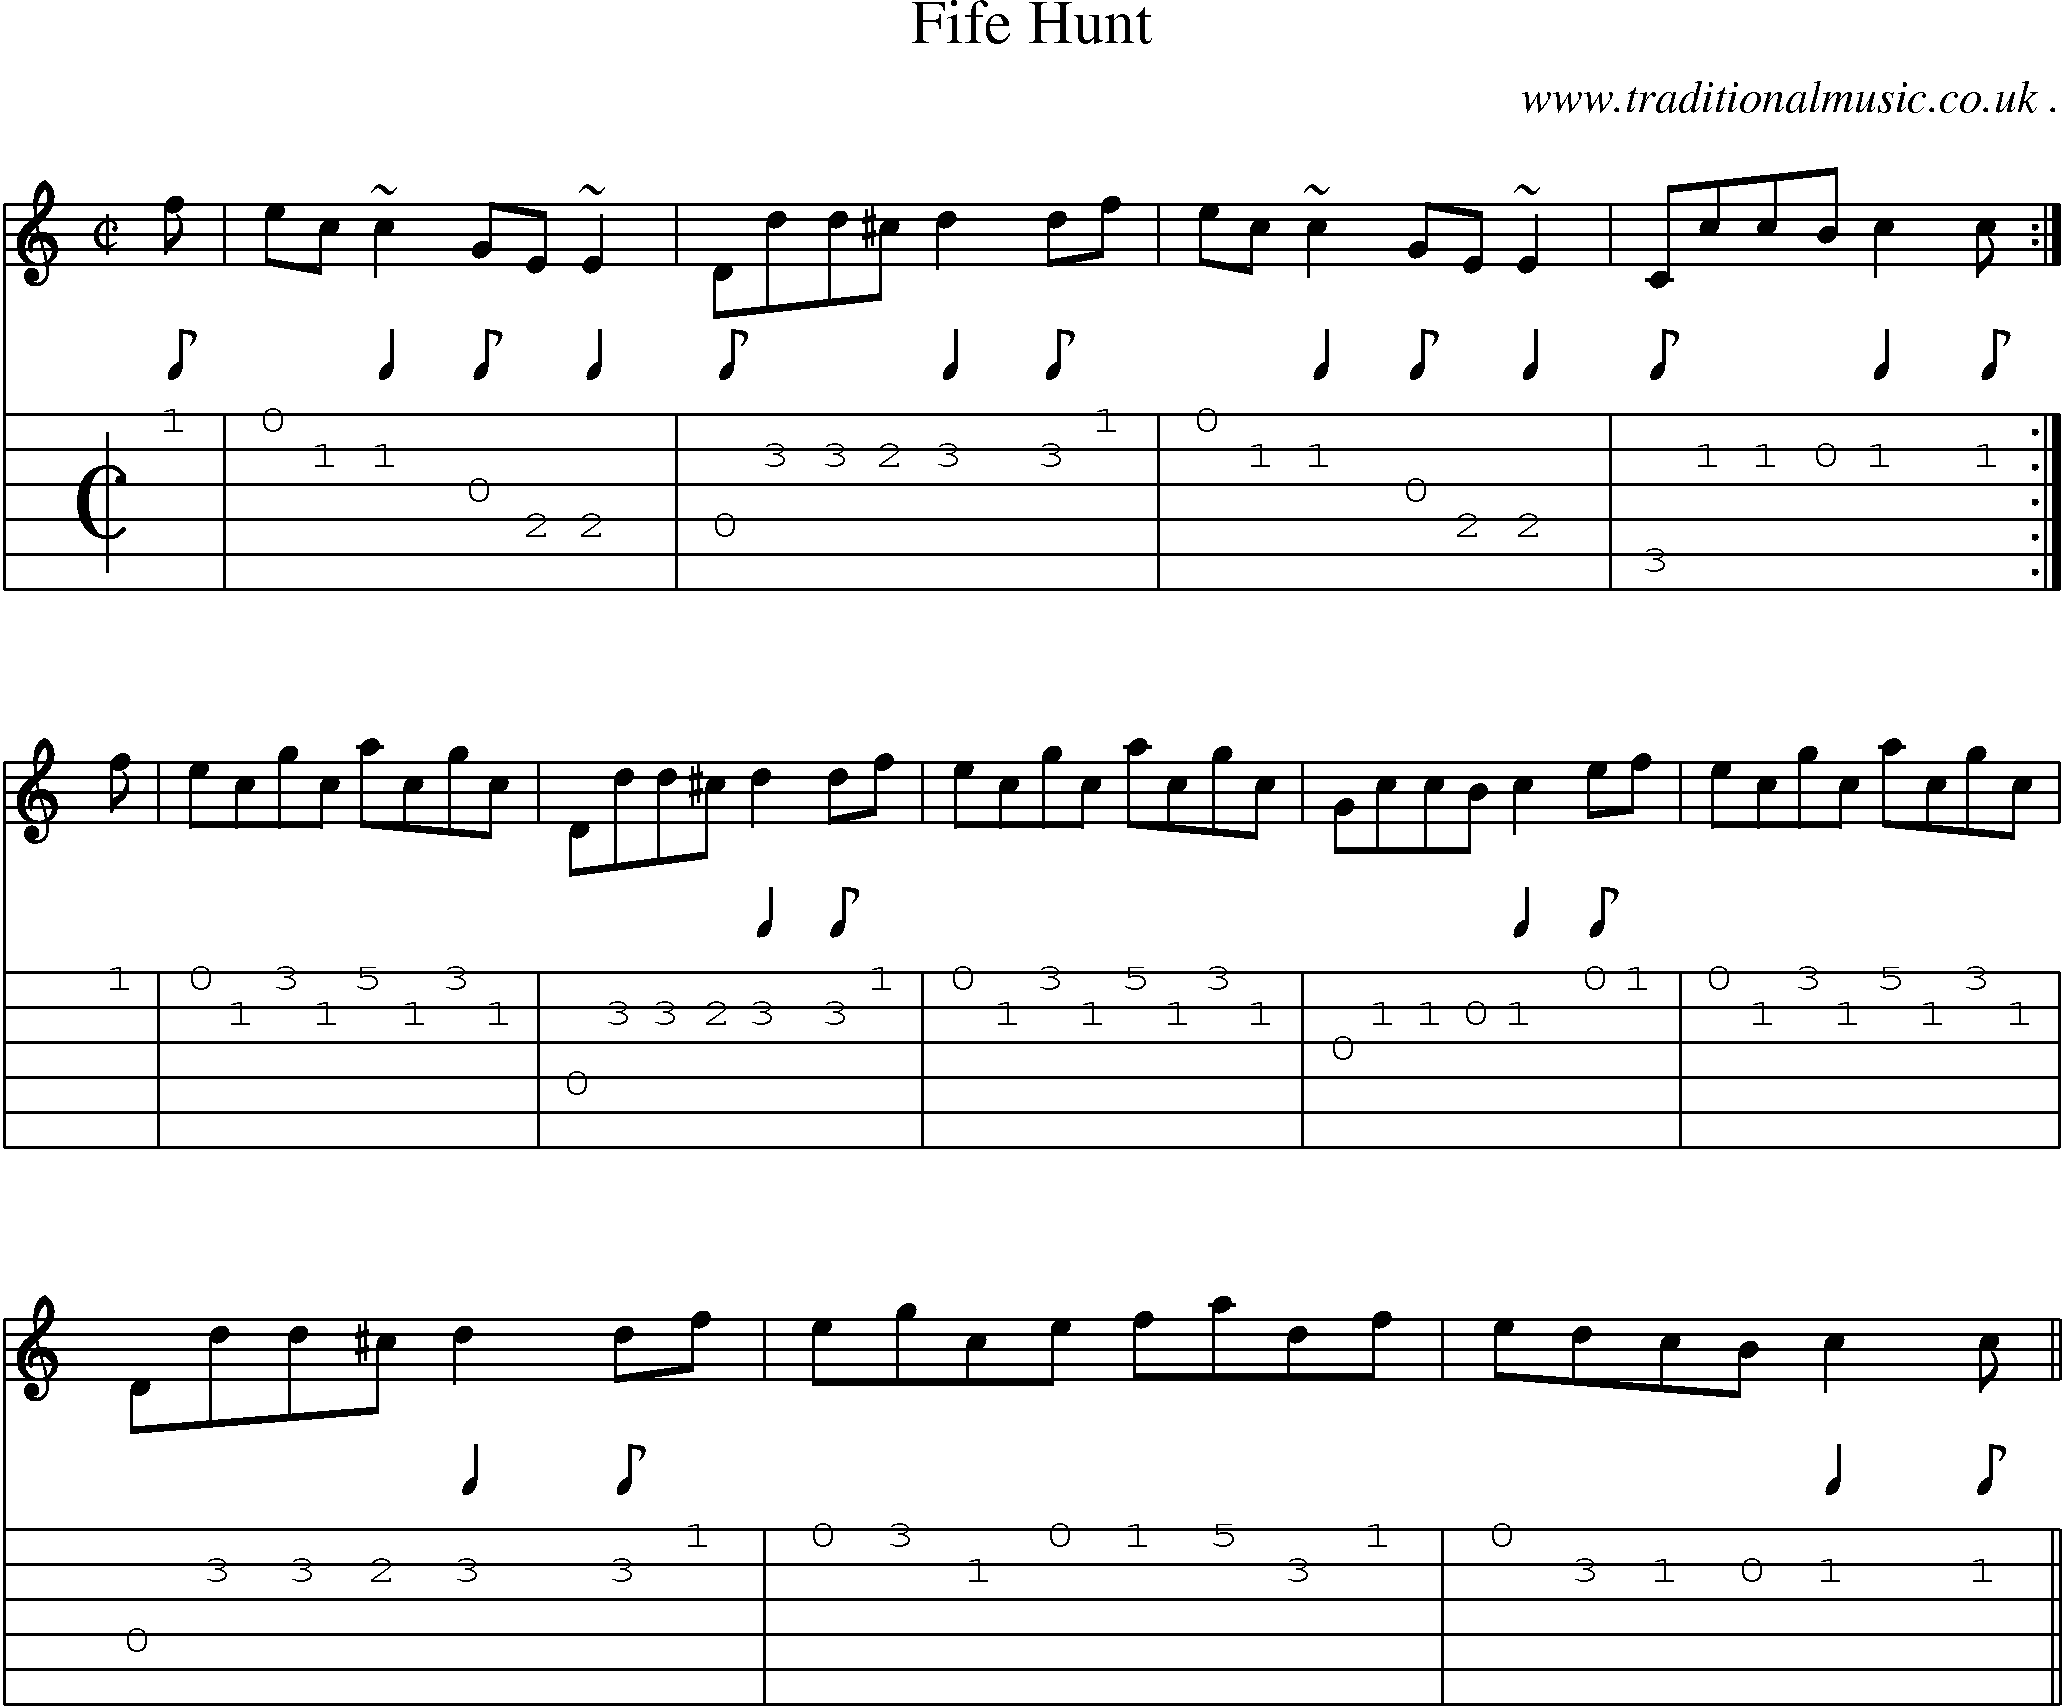 Sheet-music  score, Chords and Guitar Tabs for Fife Hunt